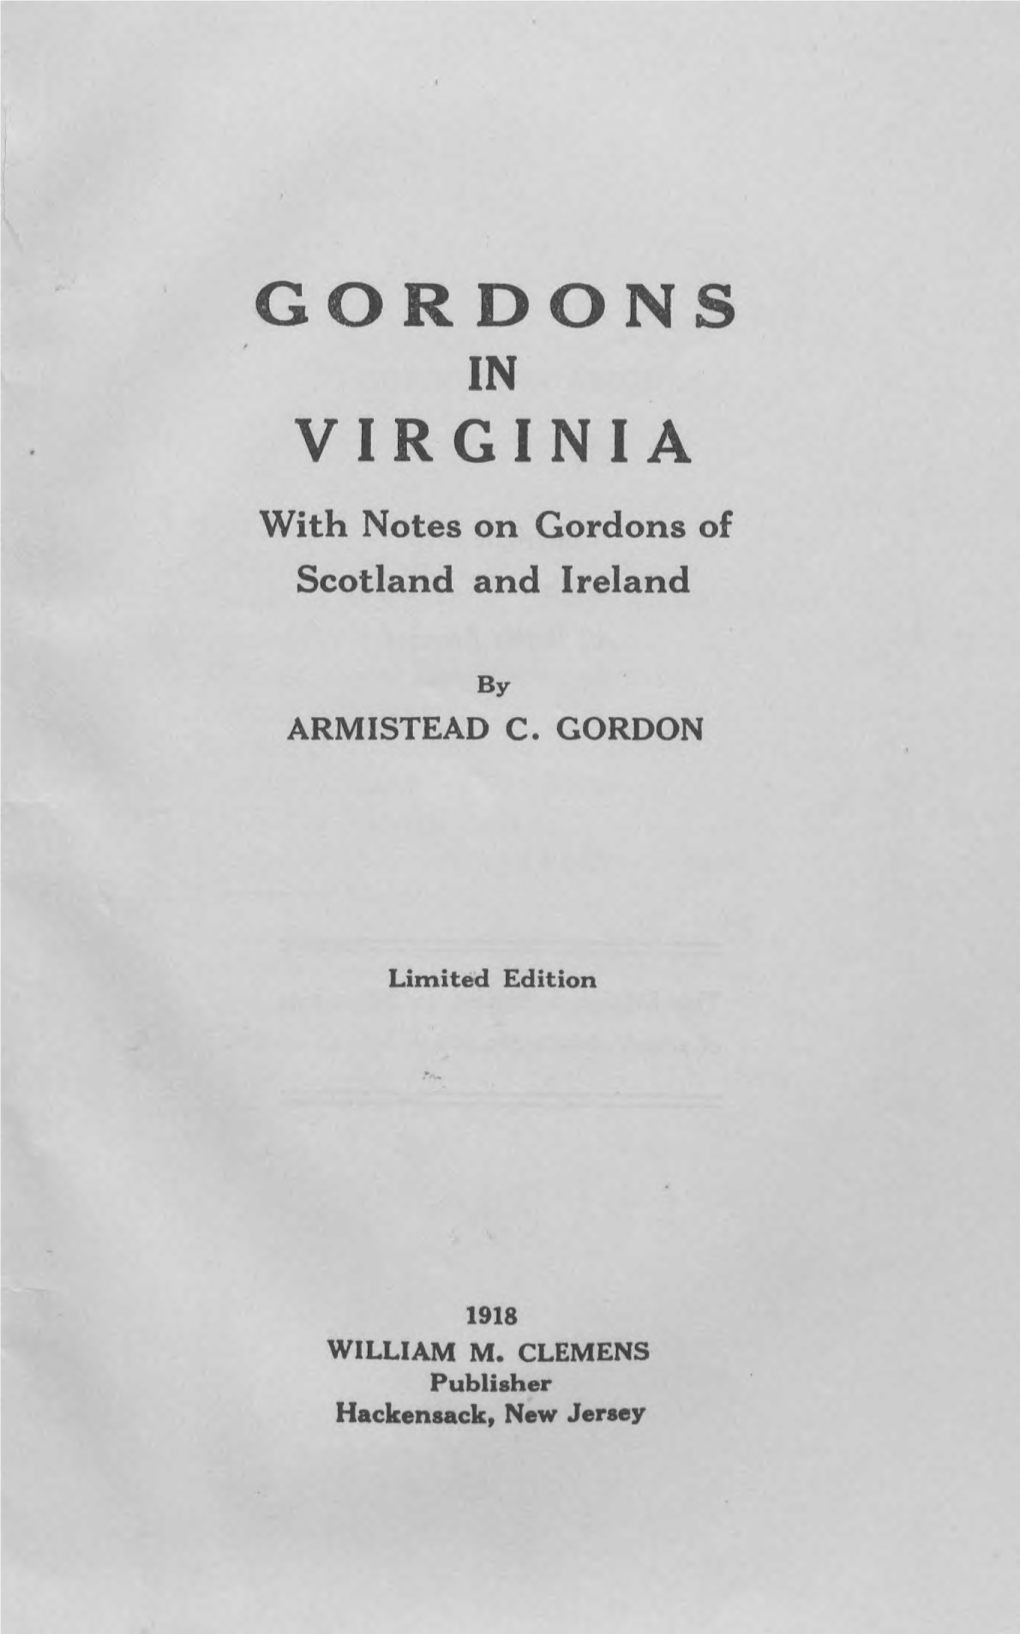 Gordons in Virginia : with Notes on Gordons of Scotland and Ireland